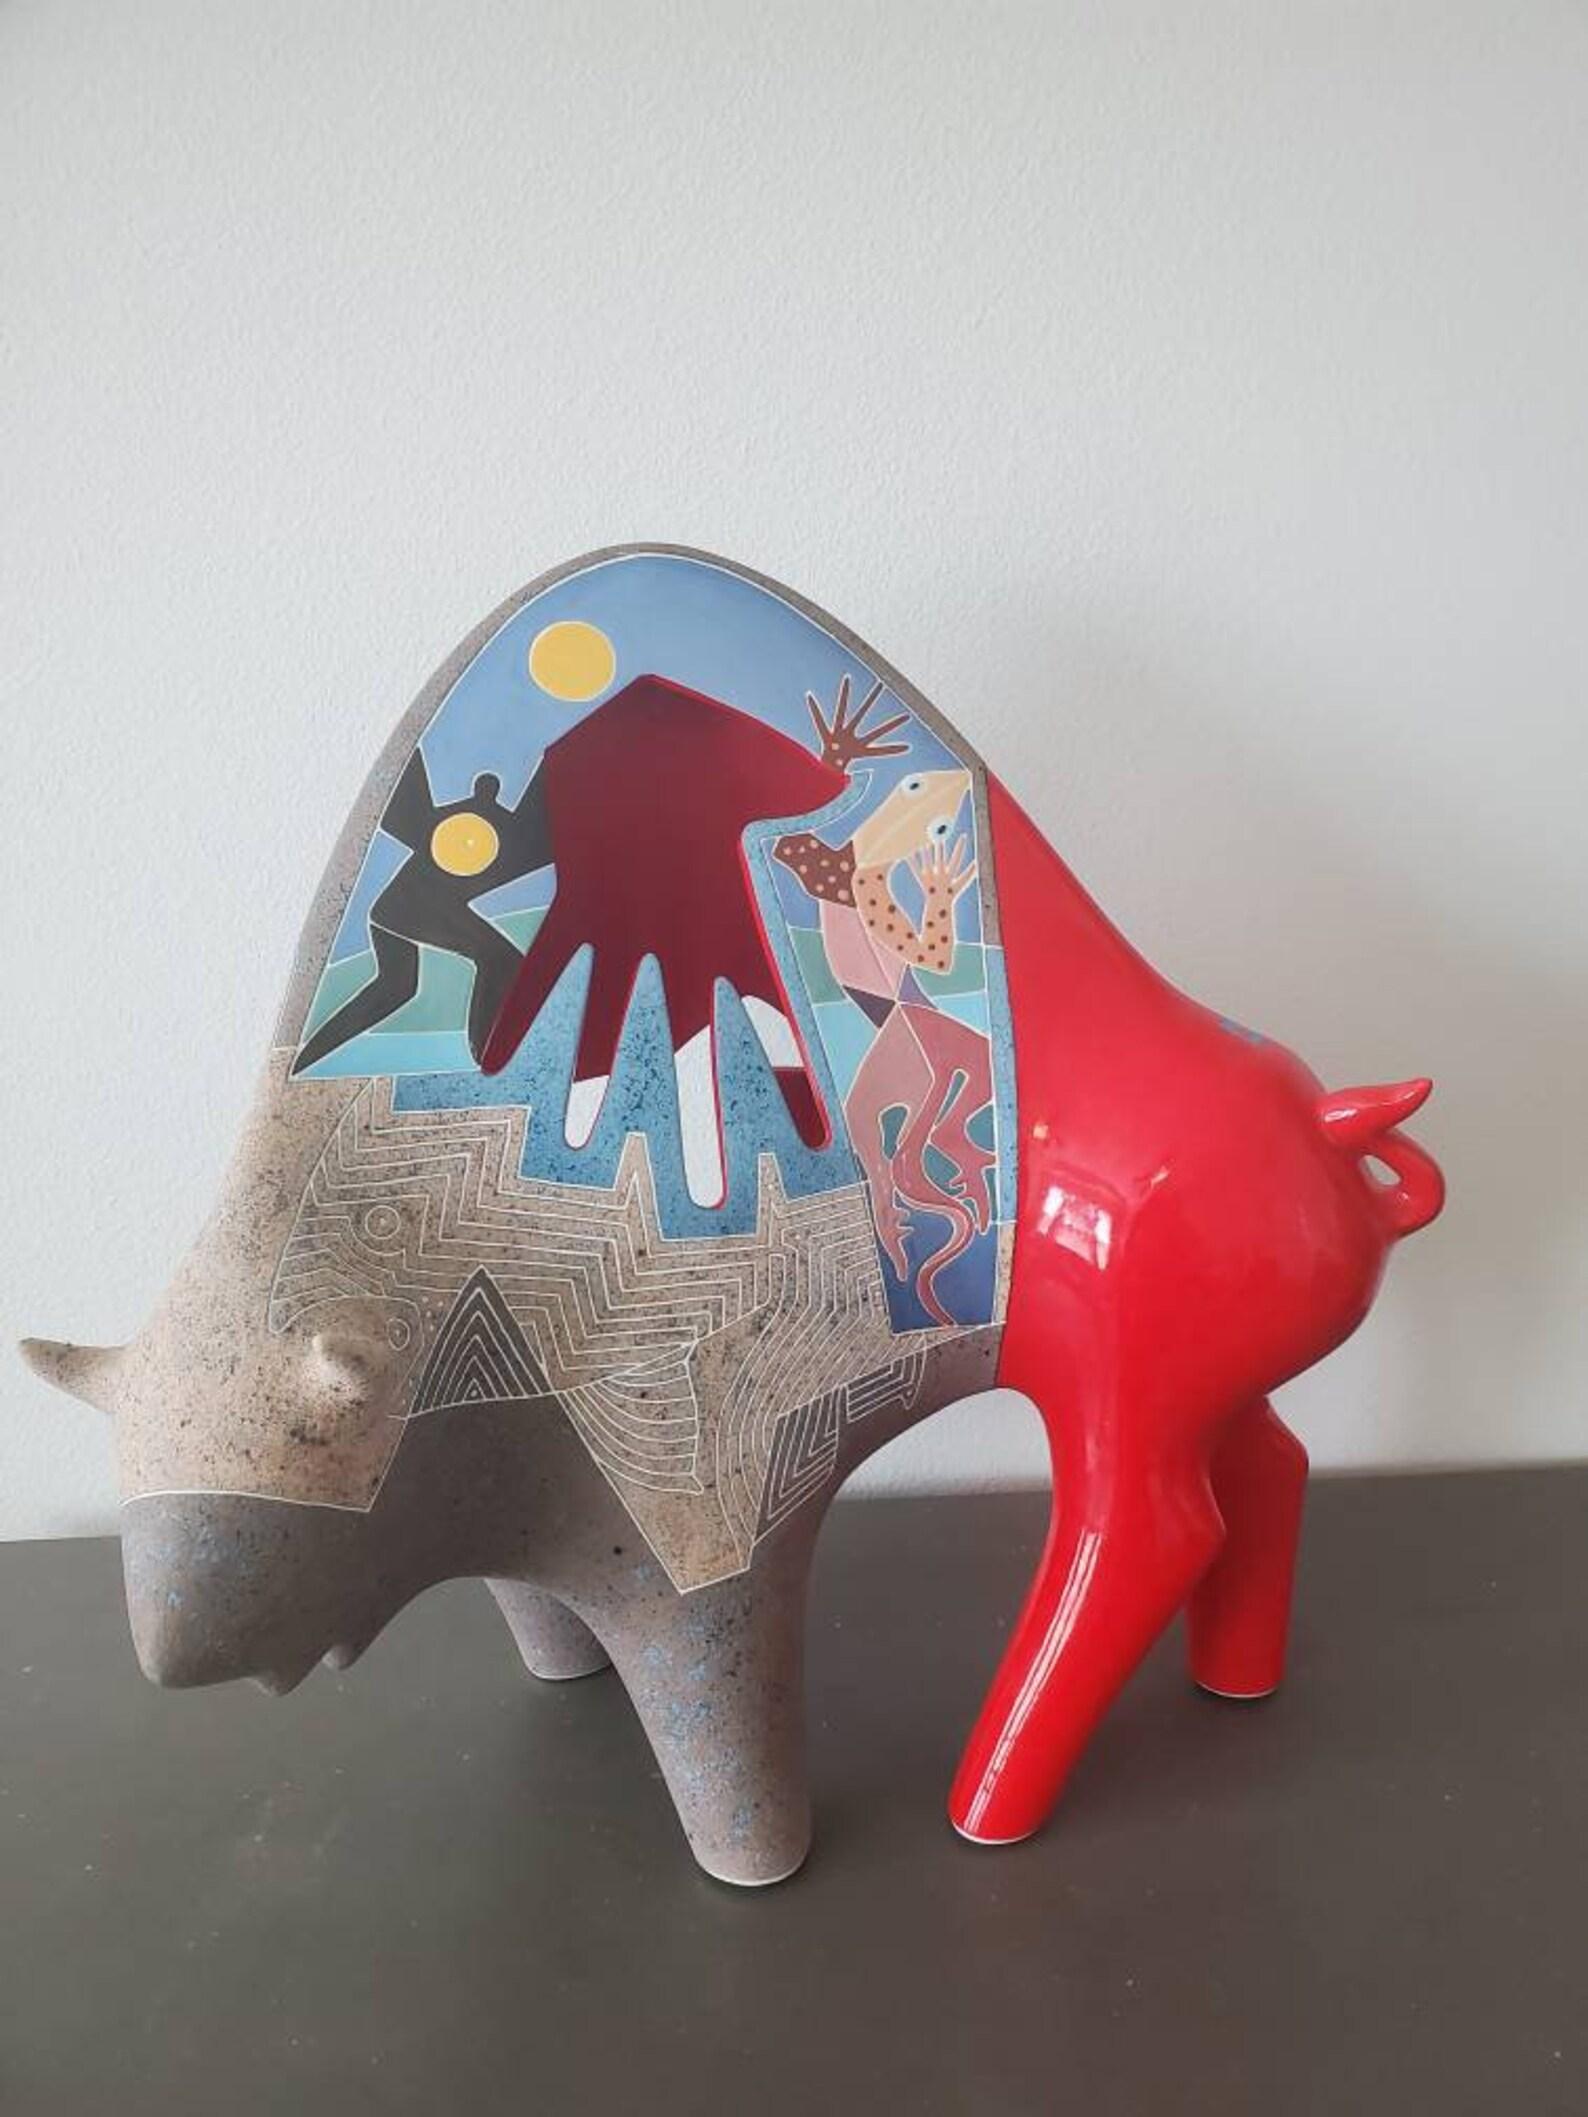 A uniquely brilliant American ceramic sculpture capturing the essence of a buffalo, in southwestern modern style by celebrated husband and wife artists Gene (1945-2006) & Rebecca Tobey (b.1948).

This large sculpture dates to the late 20th